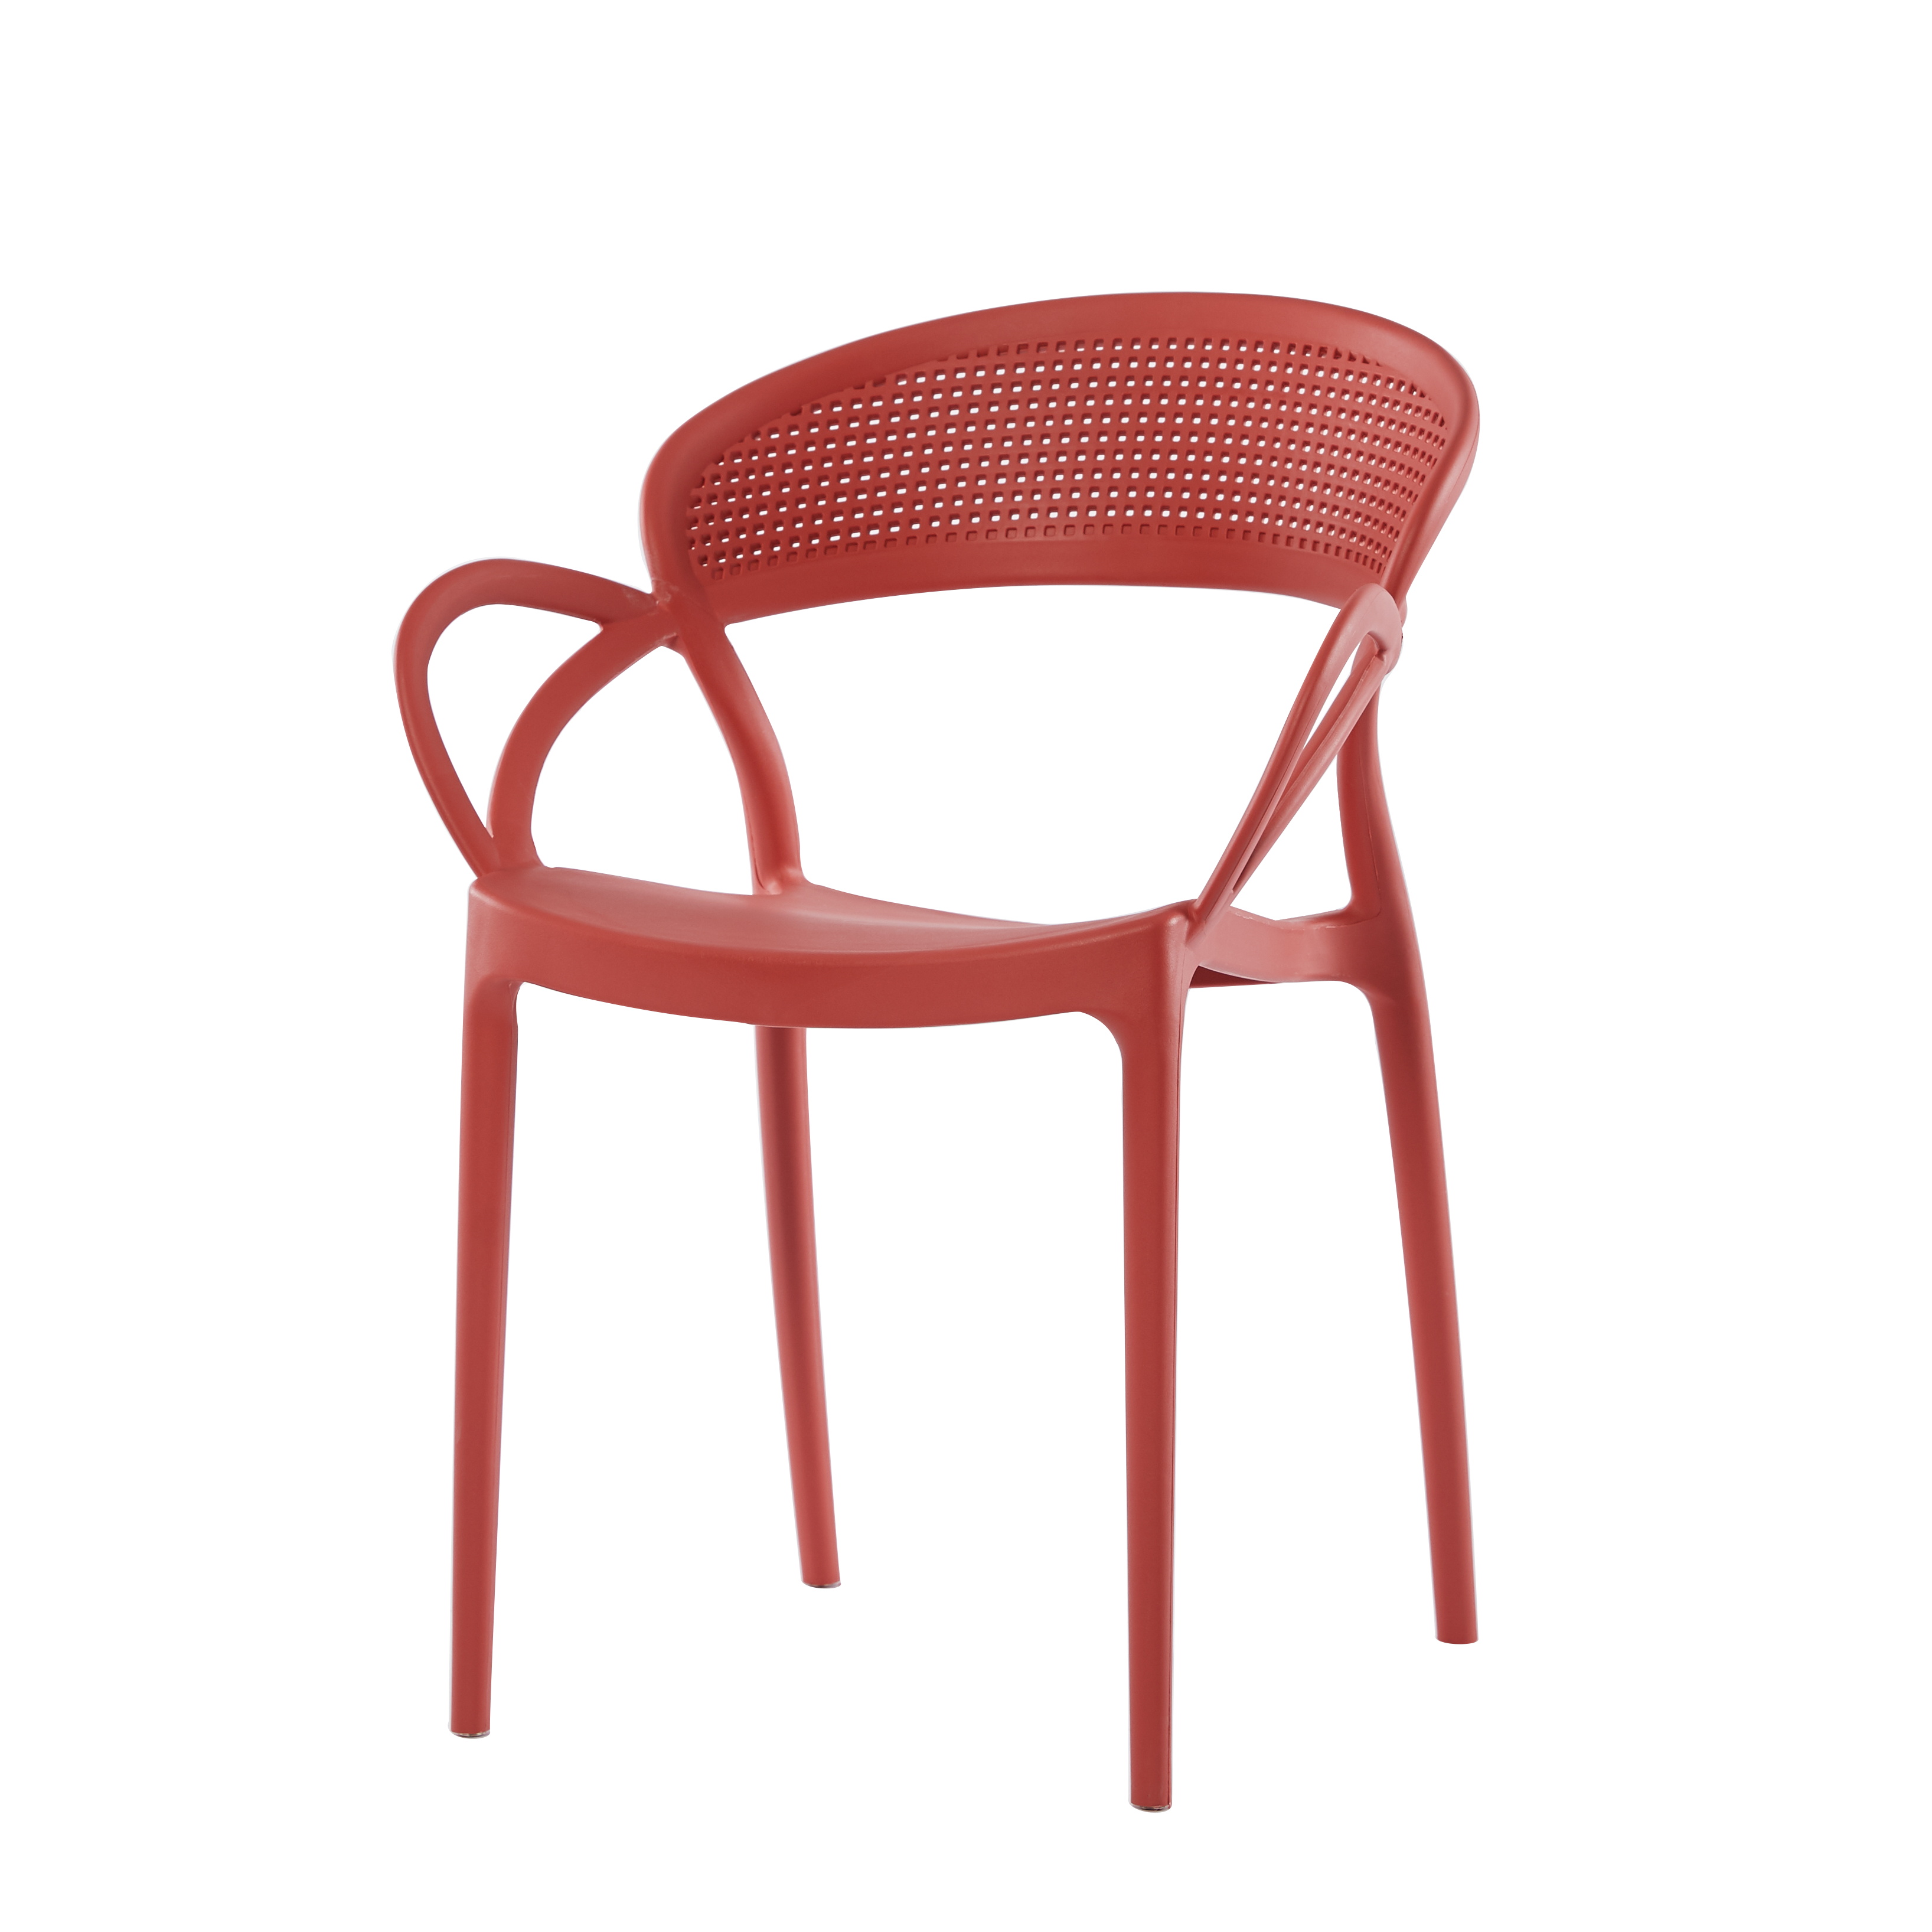 new design nordic style plastic outdoor garden dining chair with armrest